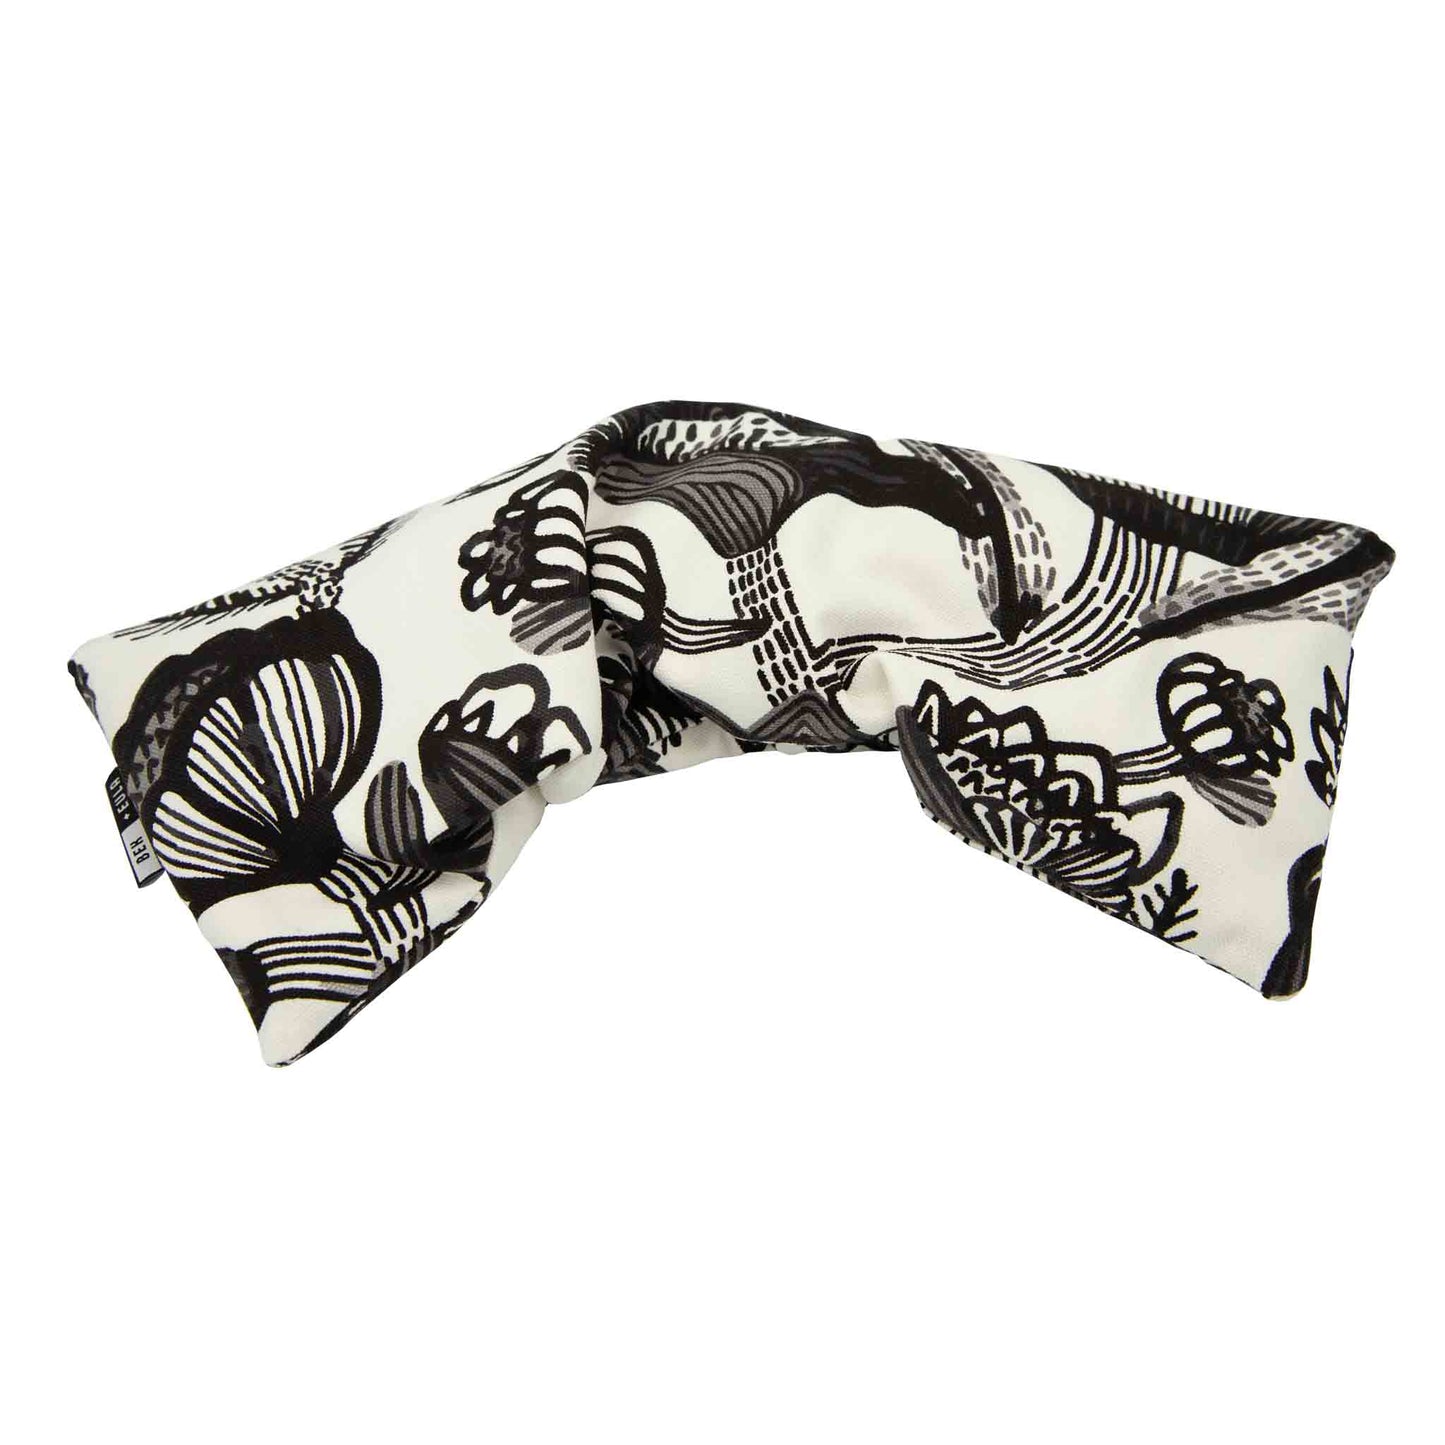 Wheat heat pack, black floral on white, showing extra length